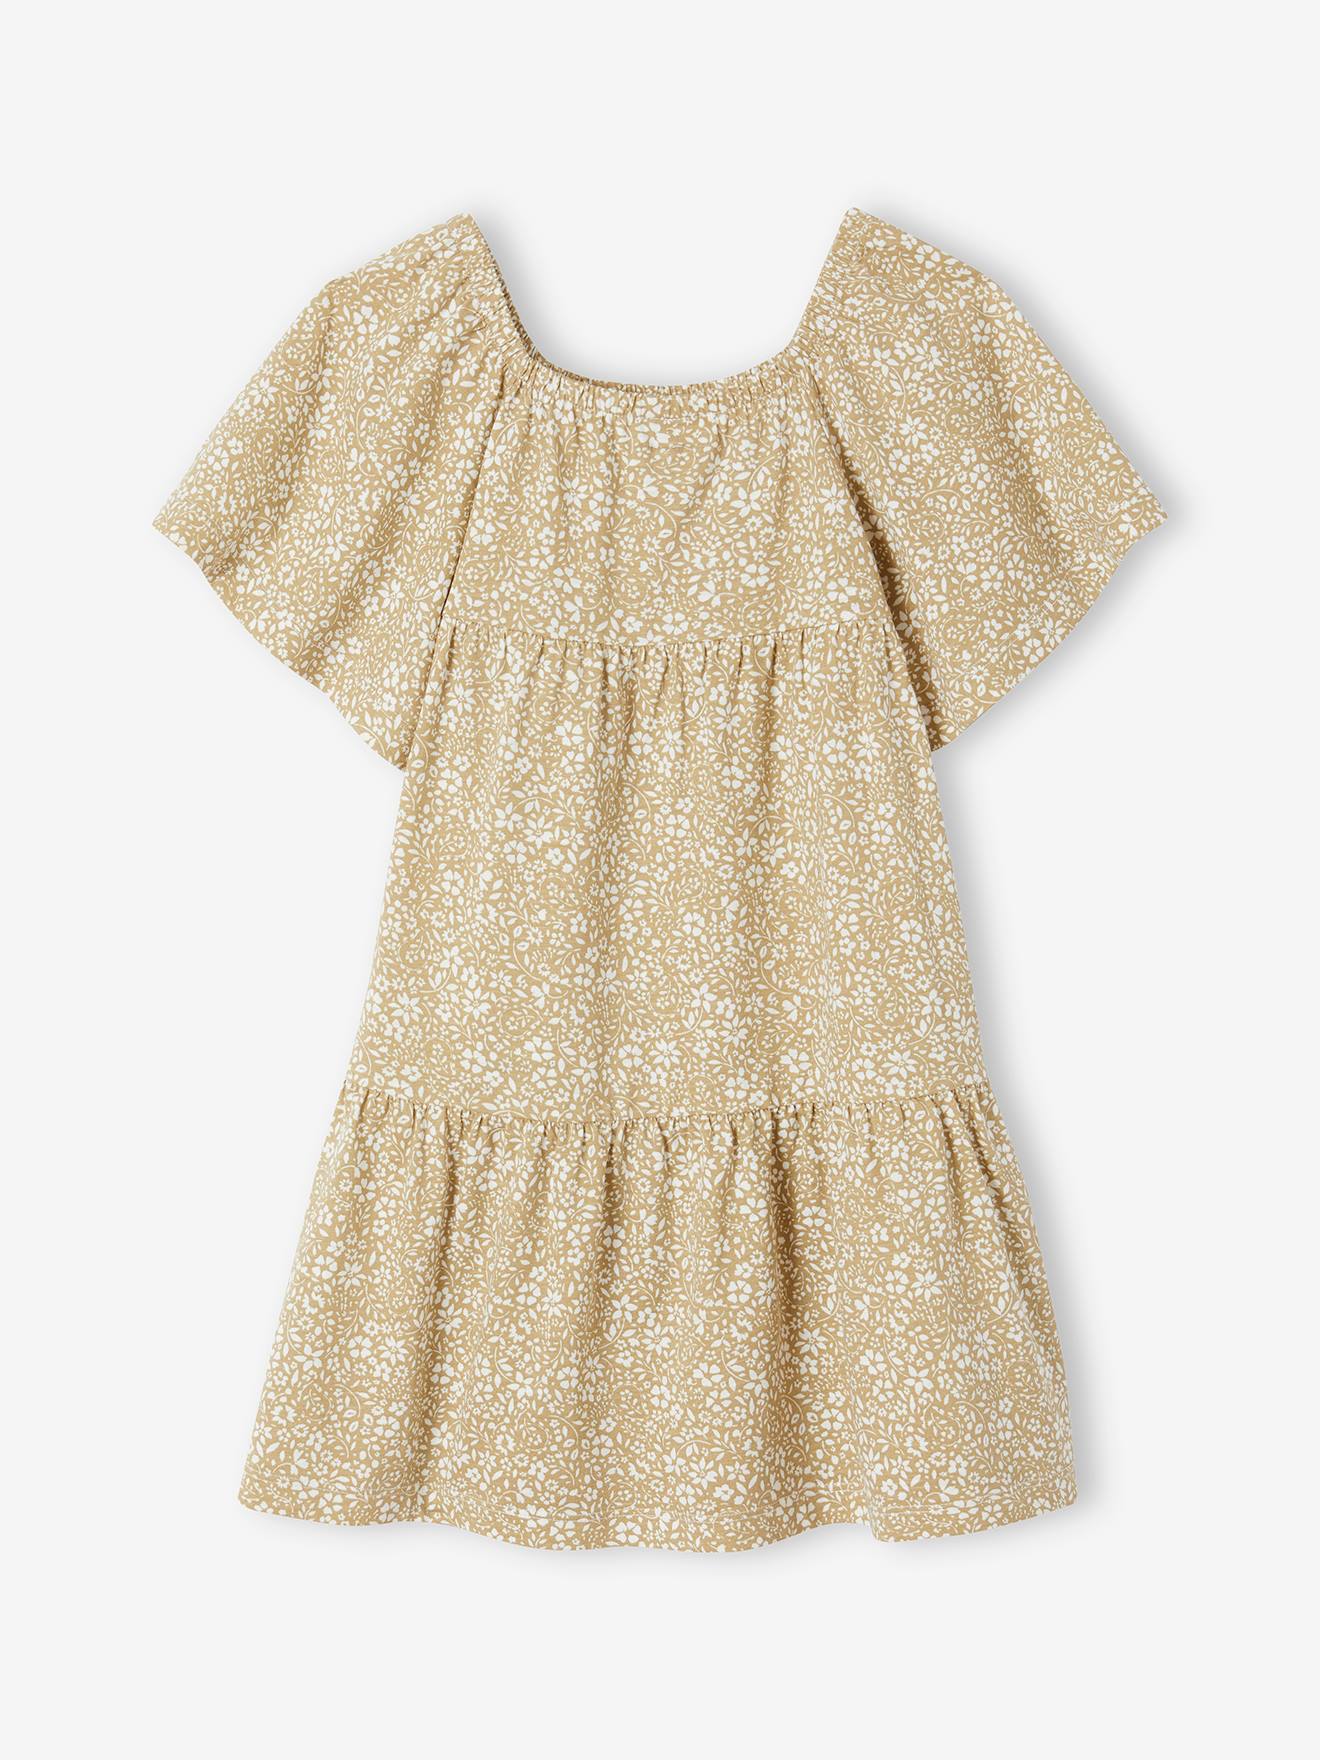 Dress with Ruffles, Floral Print, for Girls